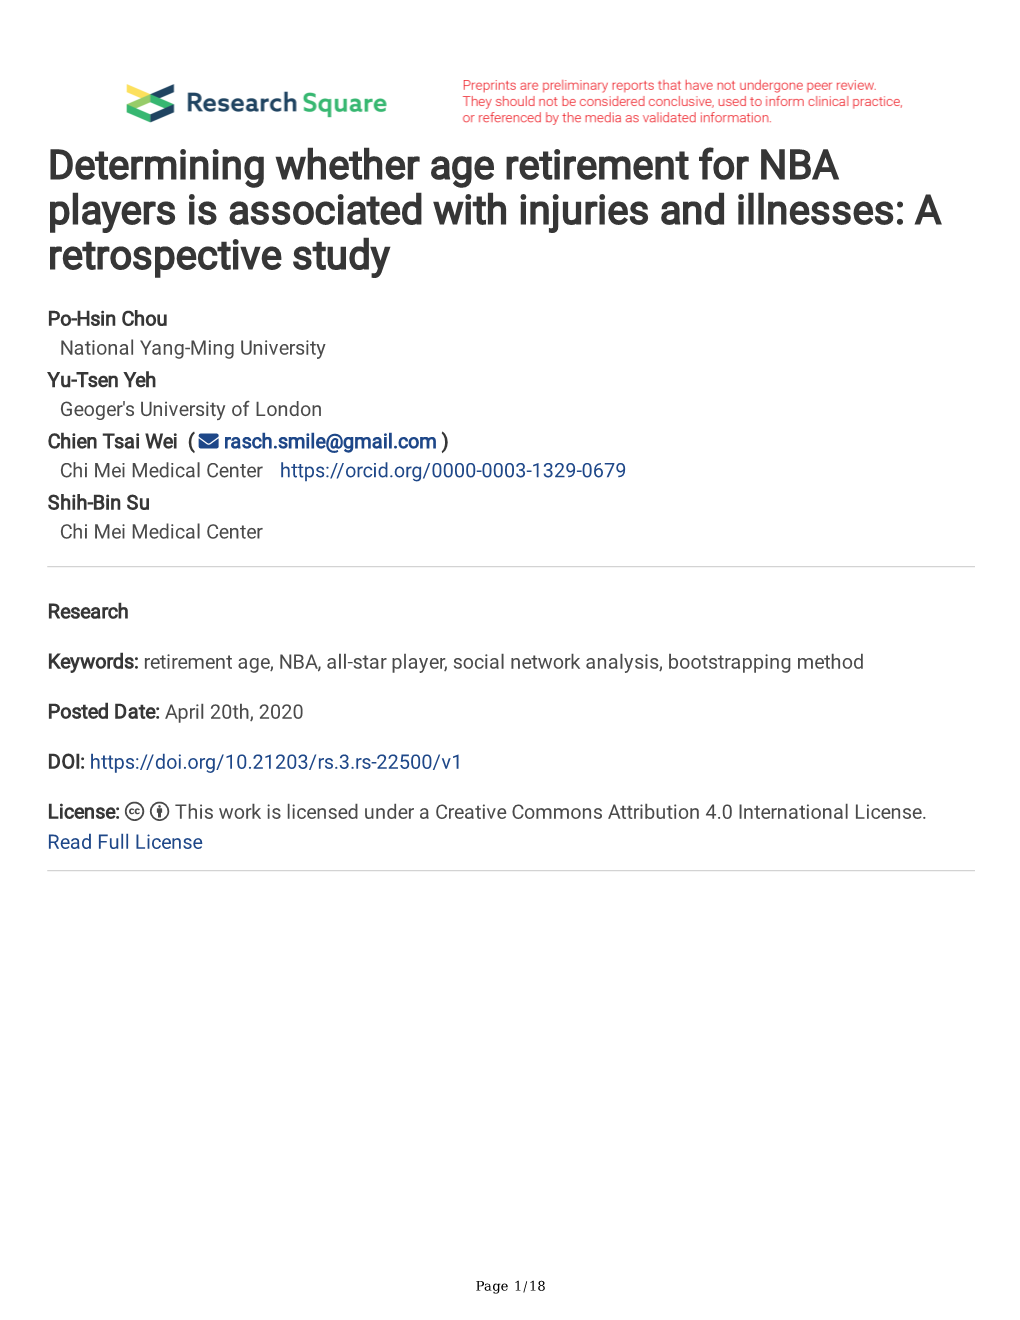 Determining Whether Age Retirement for NBA Players Is Associated with Injuries and Illnesses: a Retrospective Study